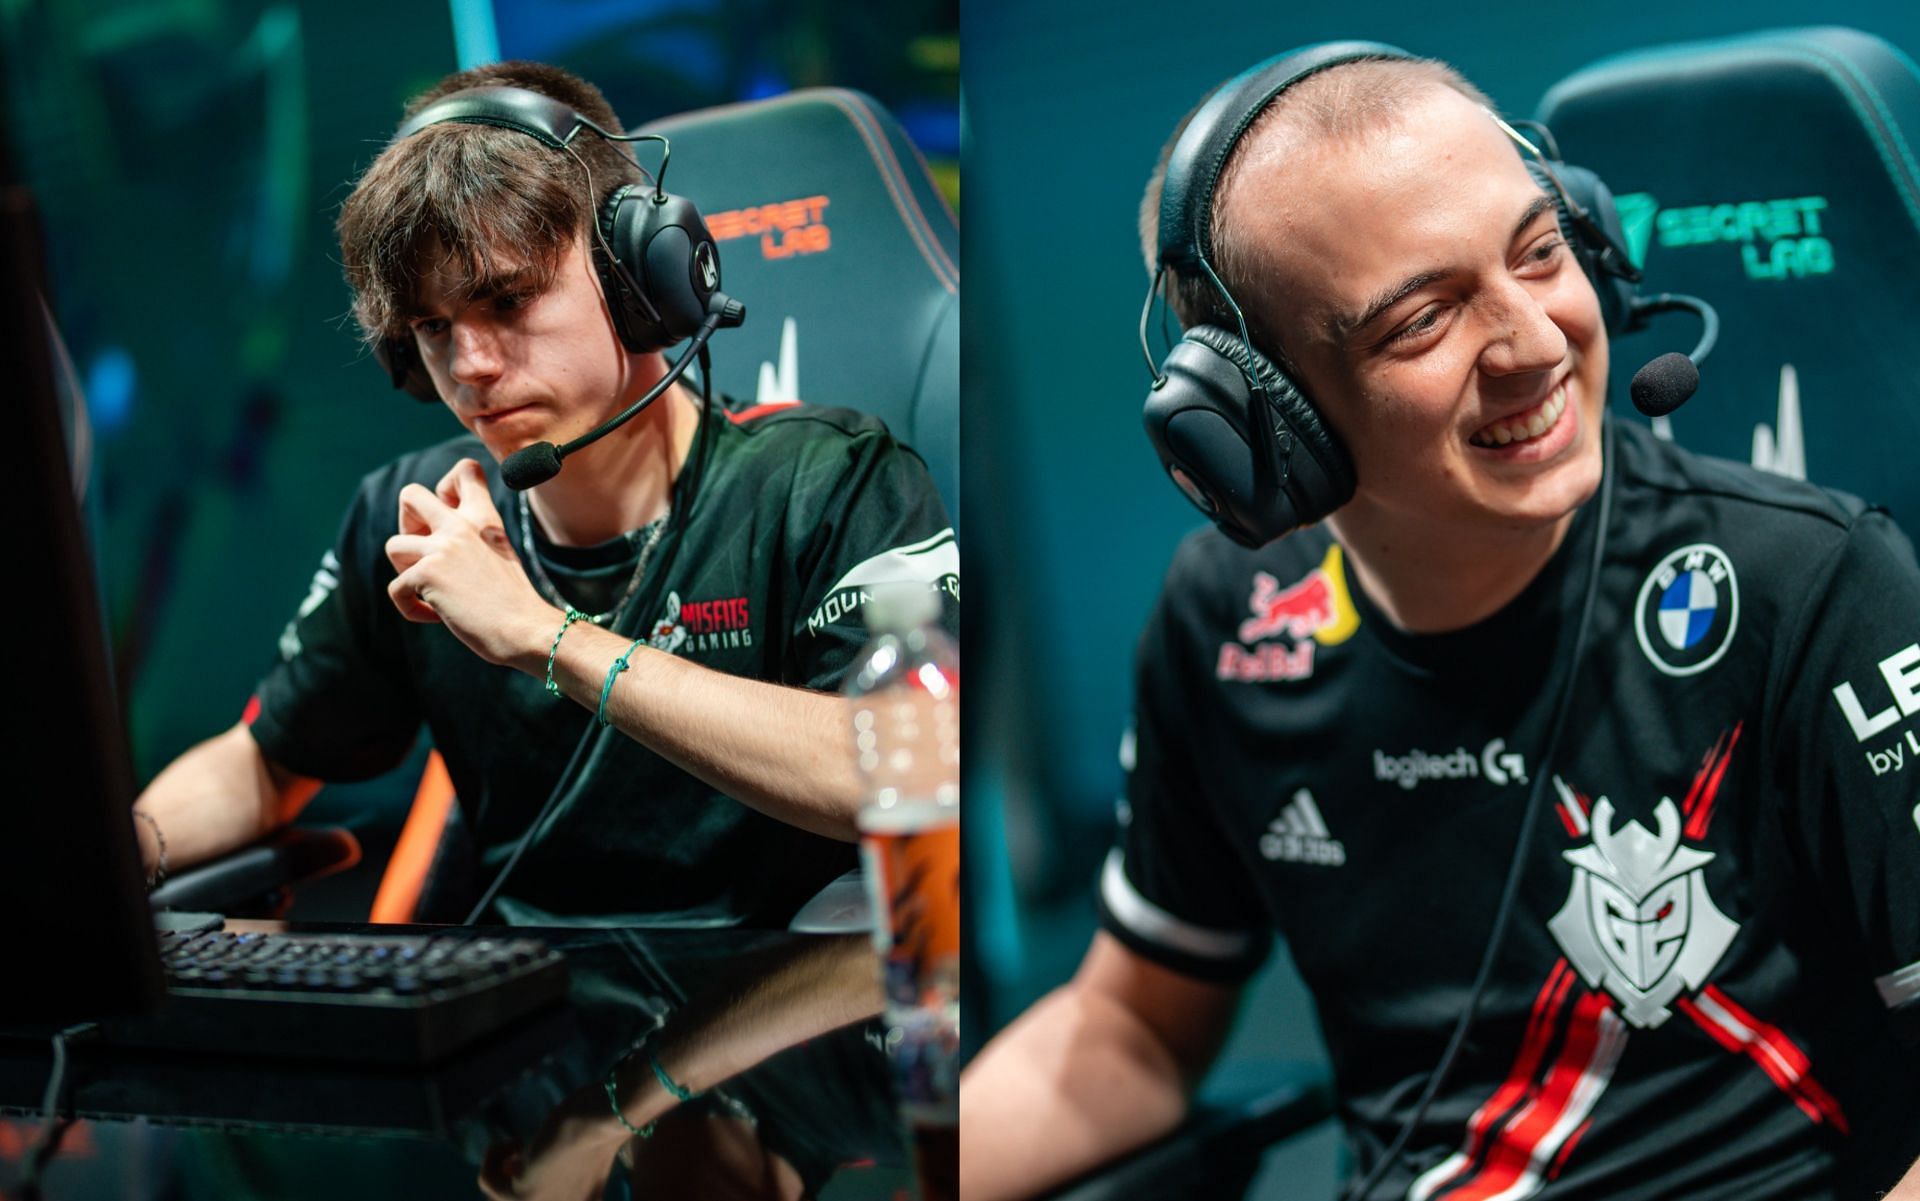 Caps vs Vetheo will be the matchup to look at when G2 Esports and Team EXCEL meet each other at LEC 2023 Winter Split (Image via Riot Games)